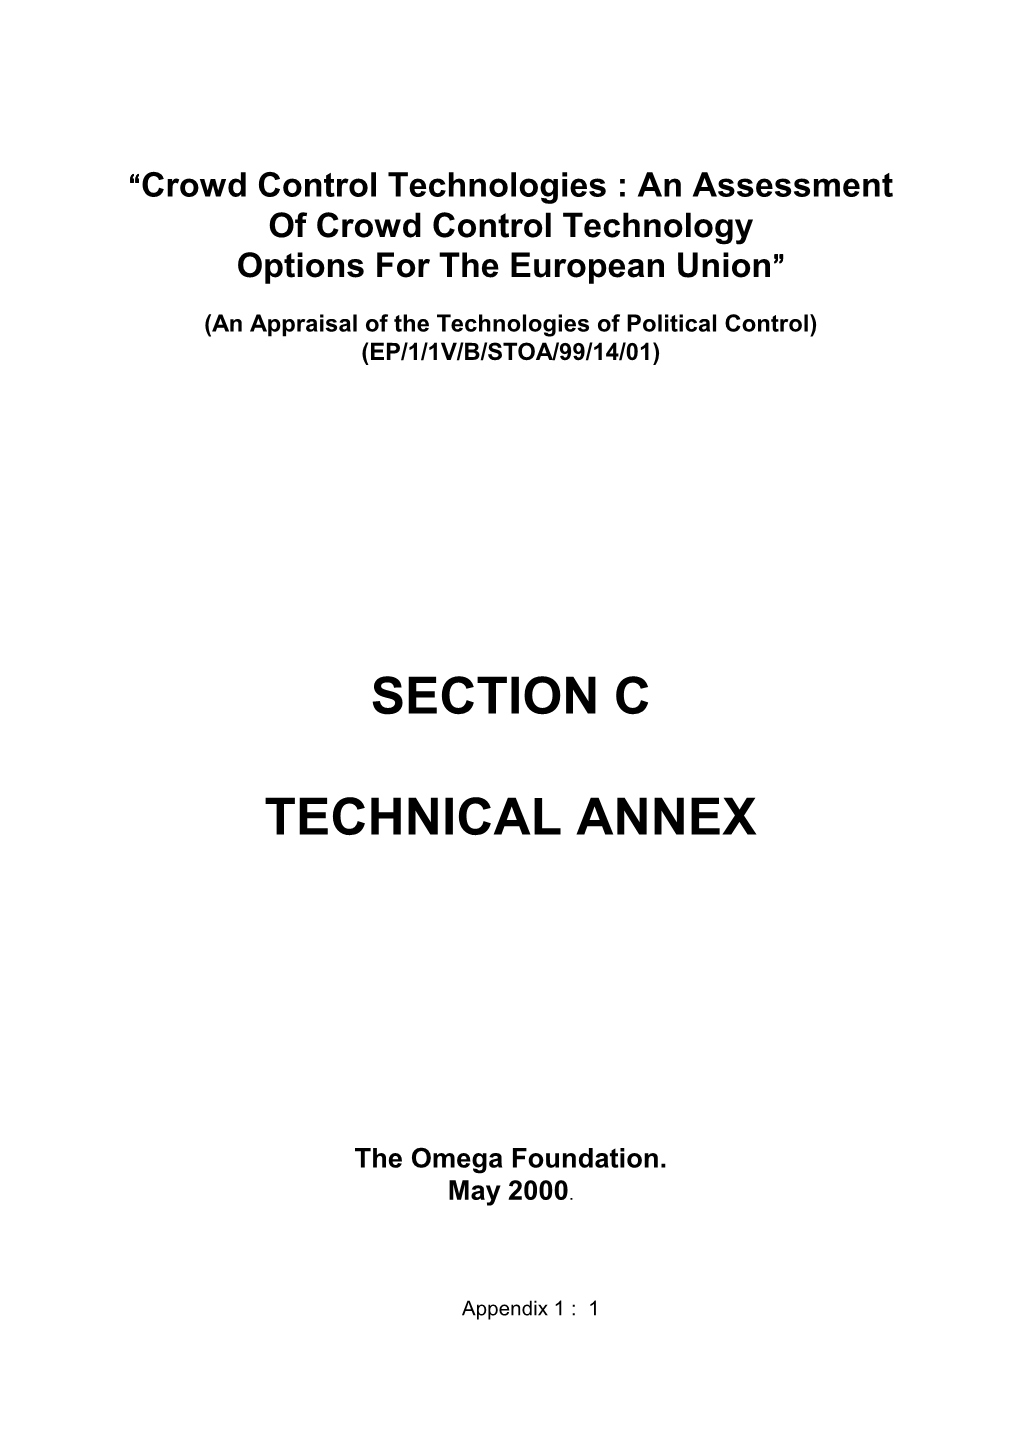 An Assessment of Crowd Control Technology Options for the European Union(